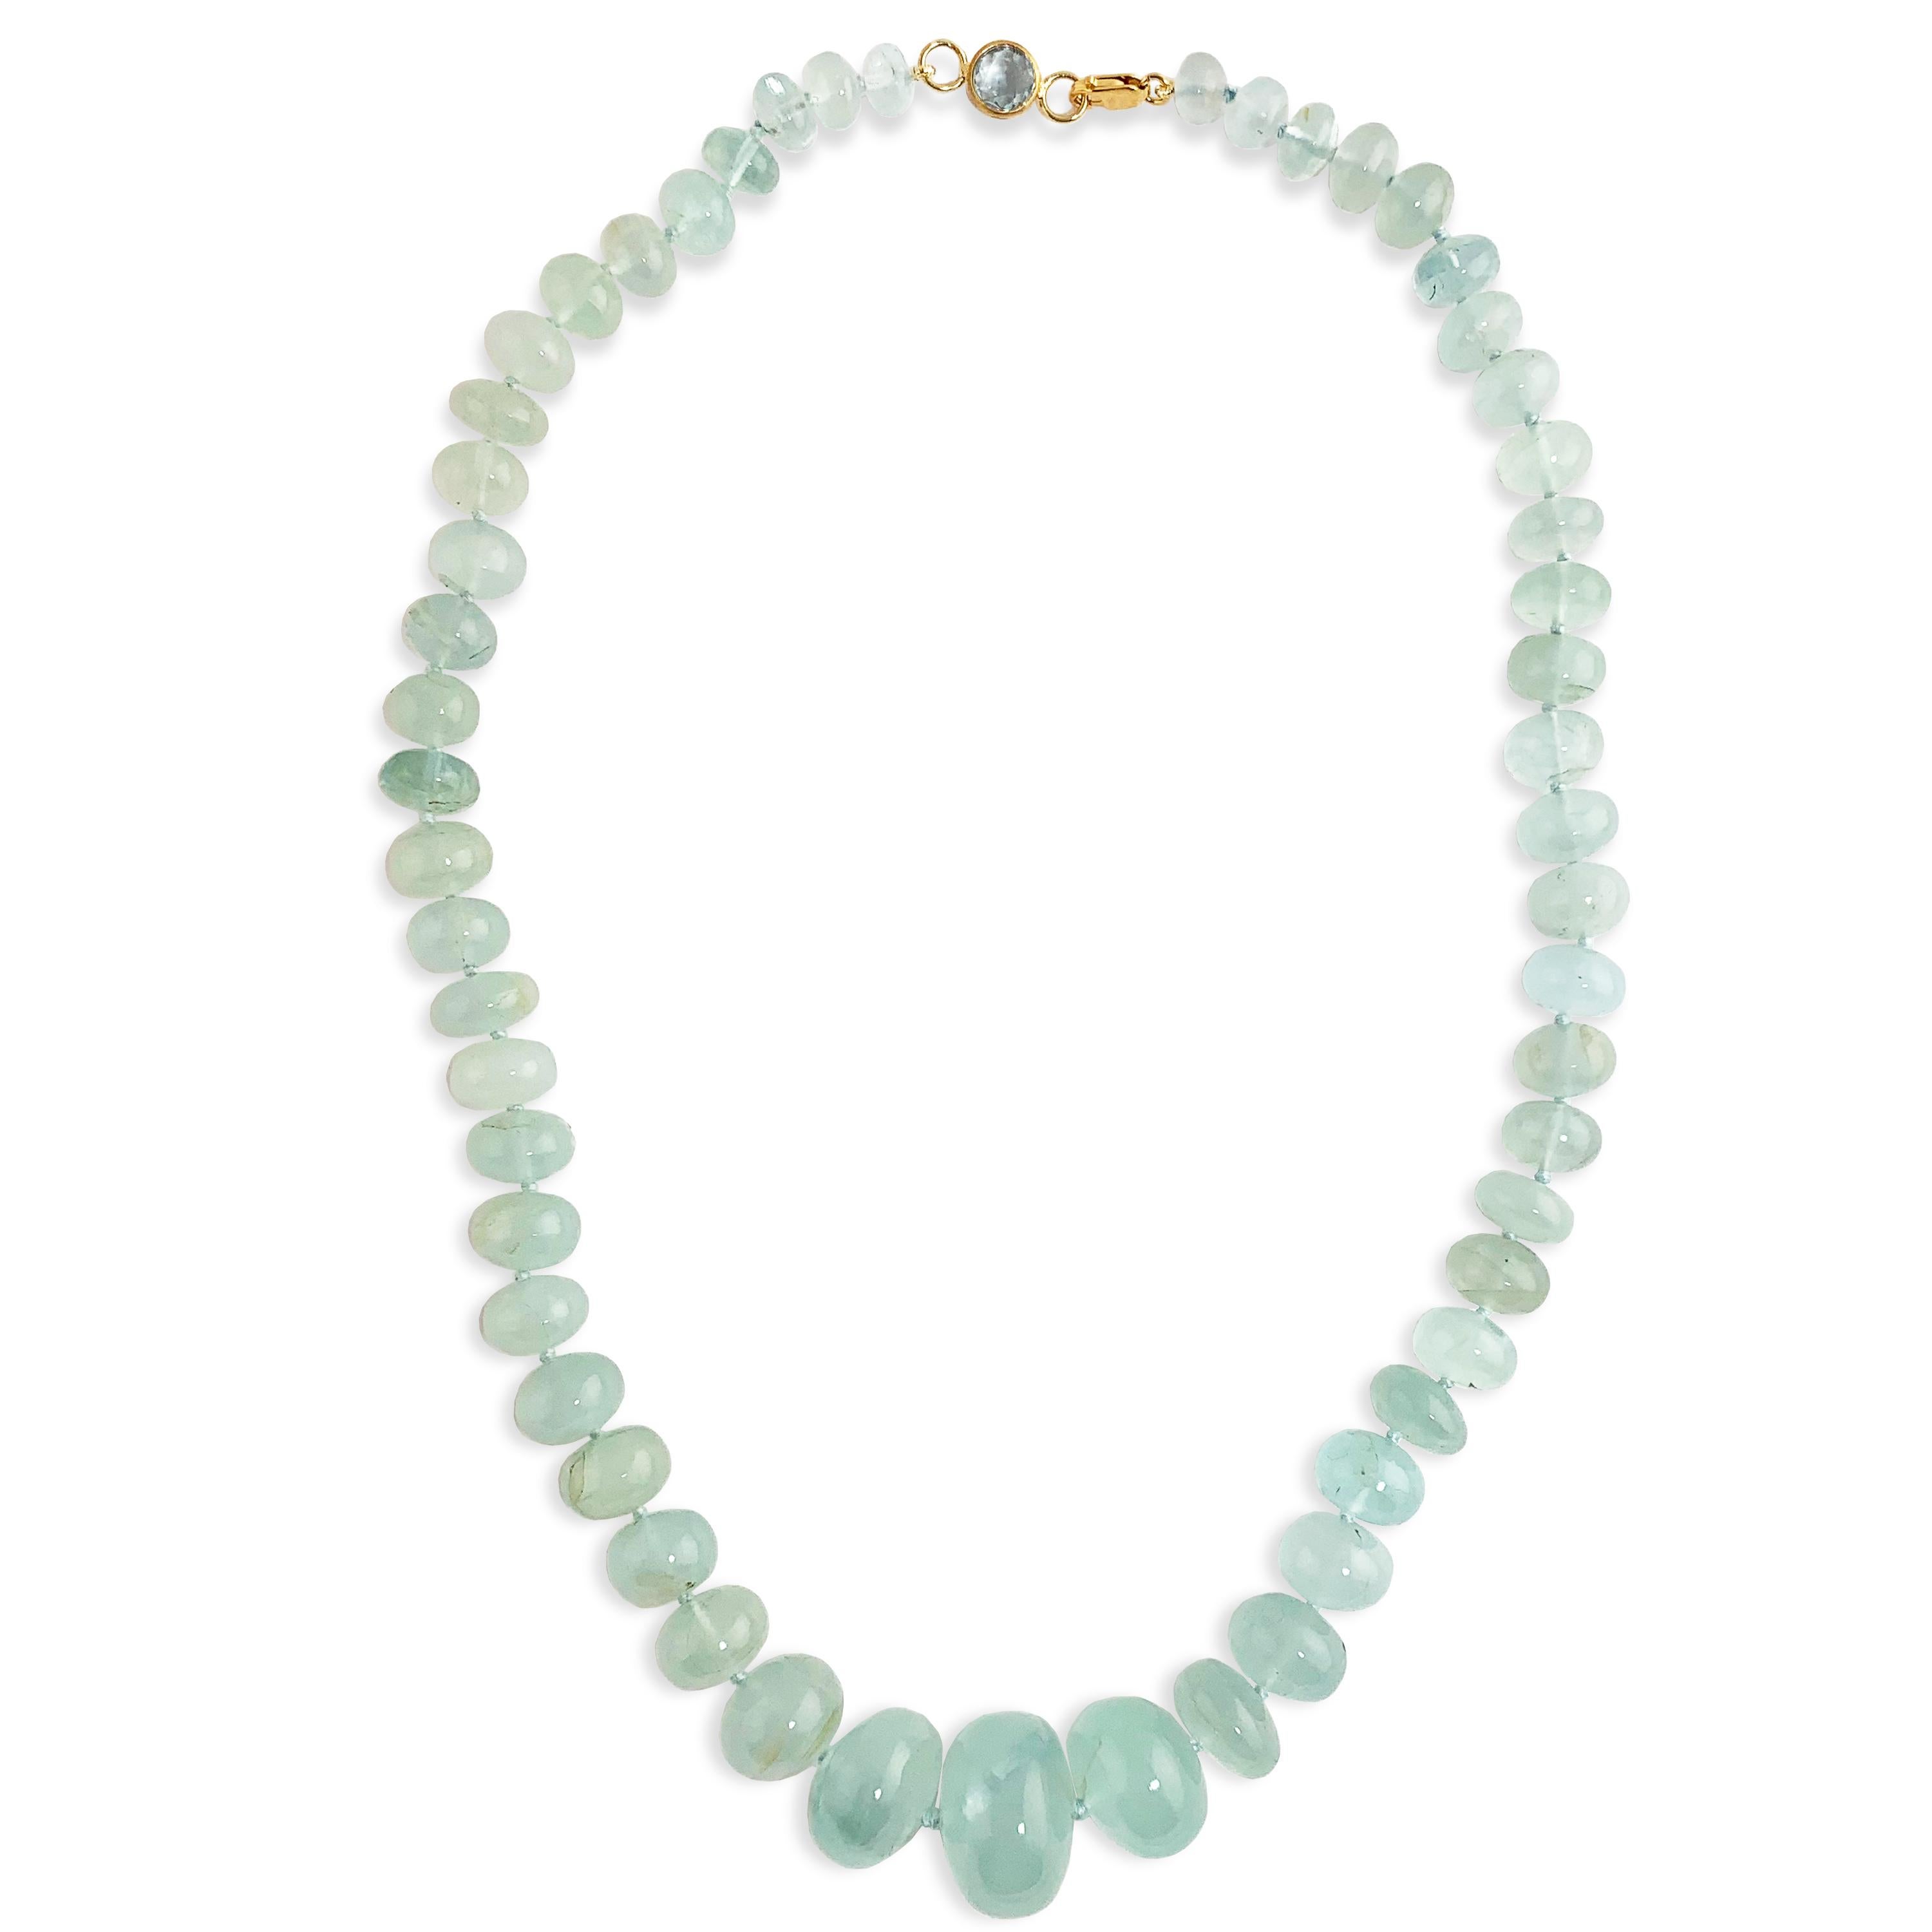 Dreamy 375 carats of Milky Aquamarine beaded necklace with a 22k faceted Aquamarine clasp with lobster closure. These feature graduated smooth gemstones.  Measures 18.5